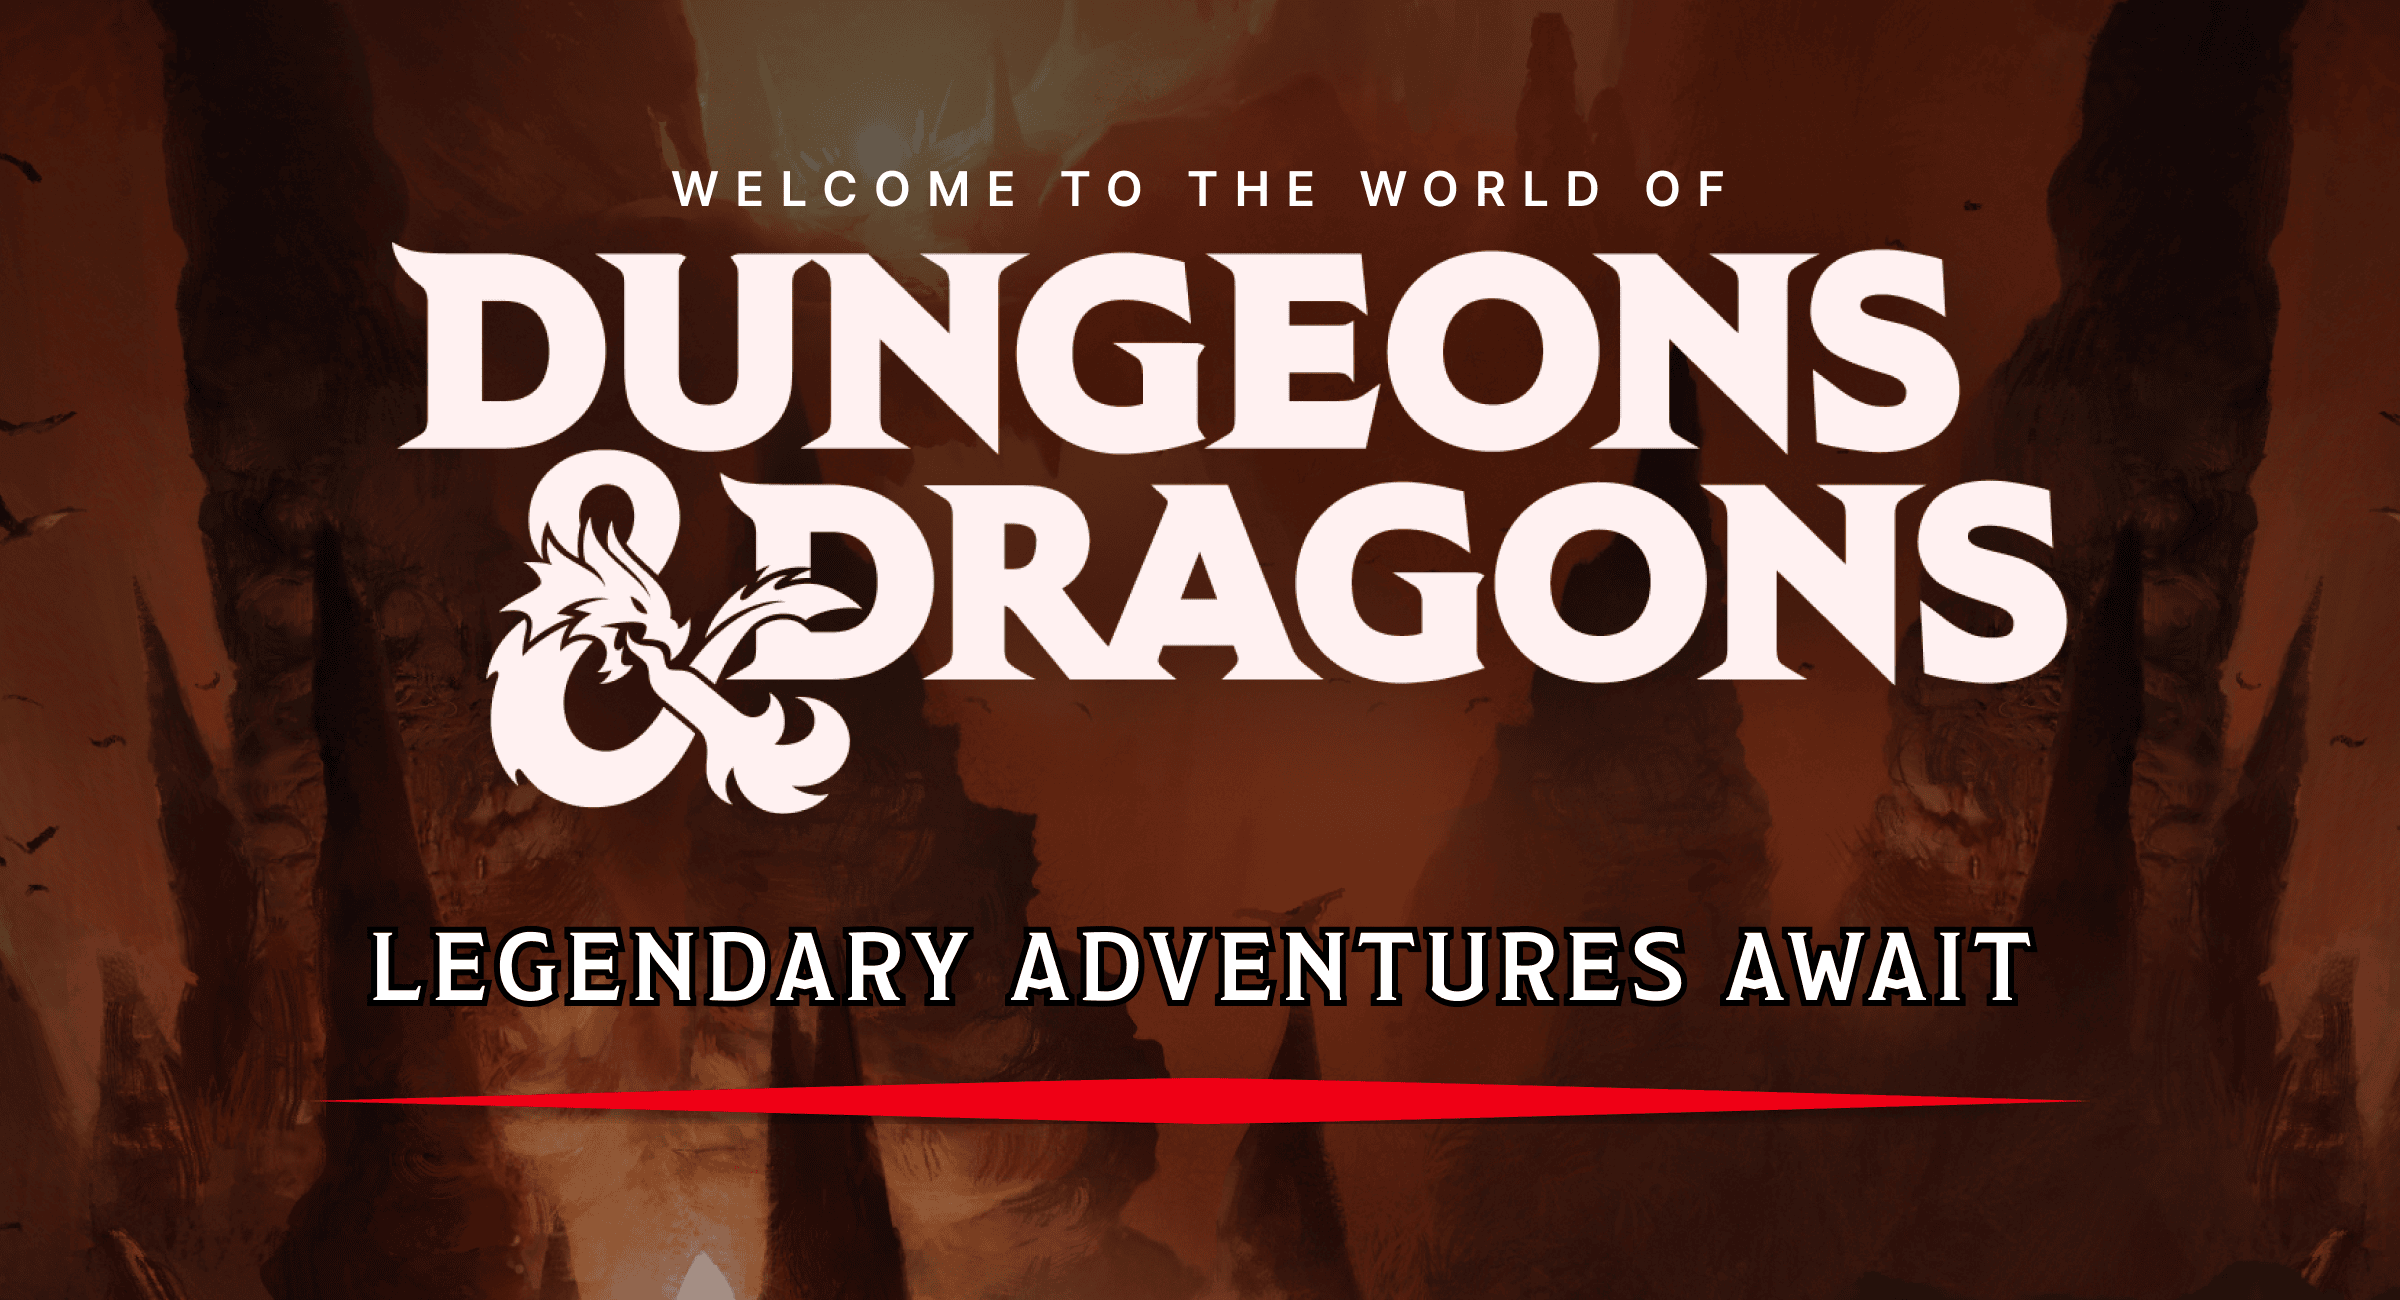 A logo for Dungeons & Dragons